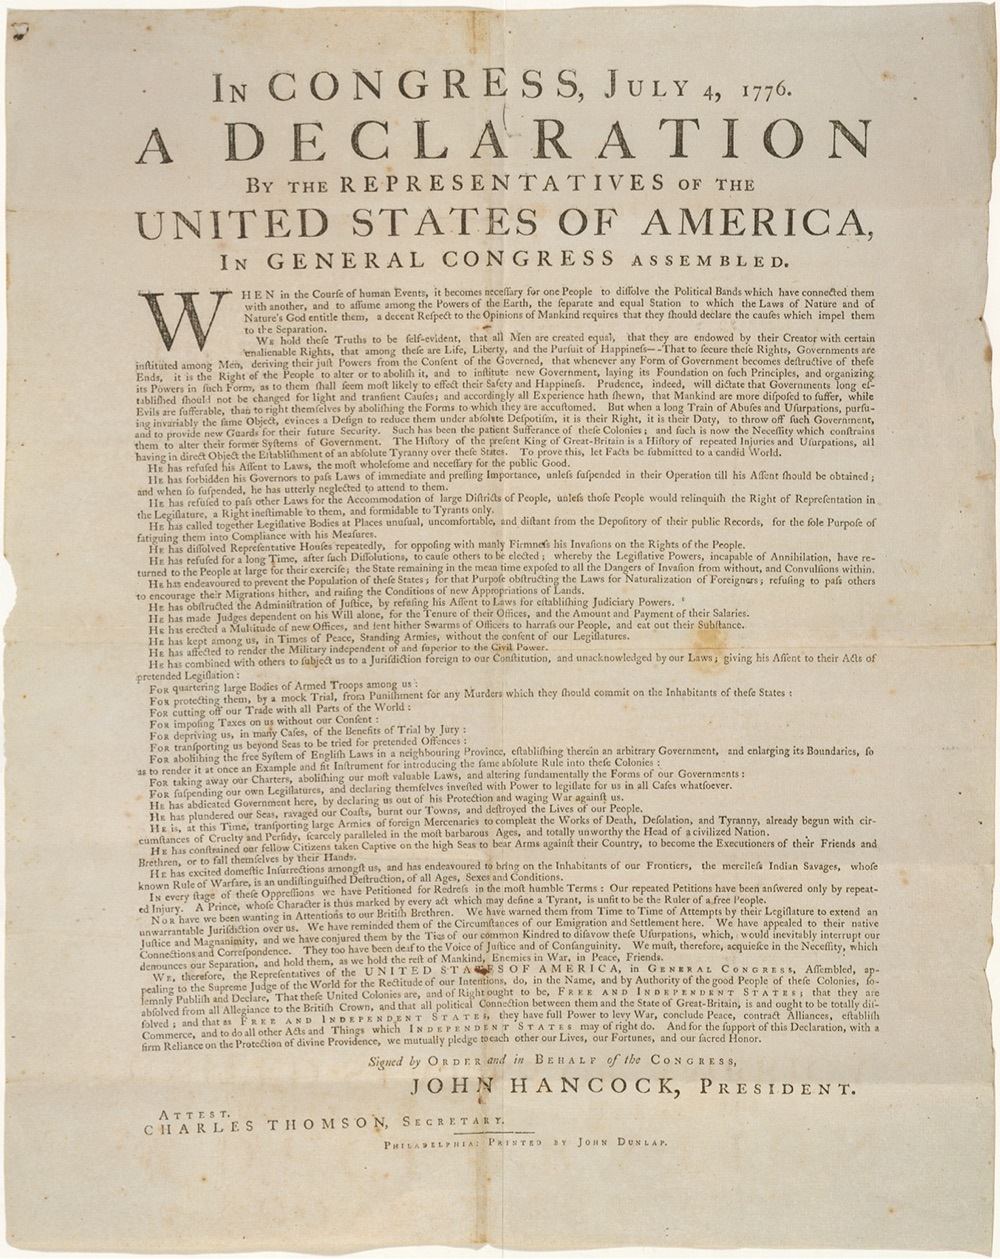 a copy of the original printing of the Declaration of Independence